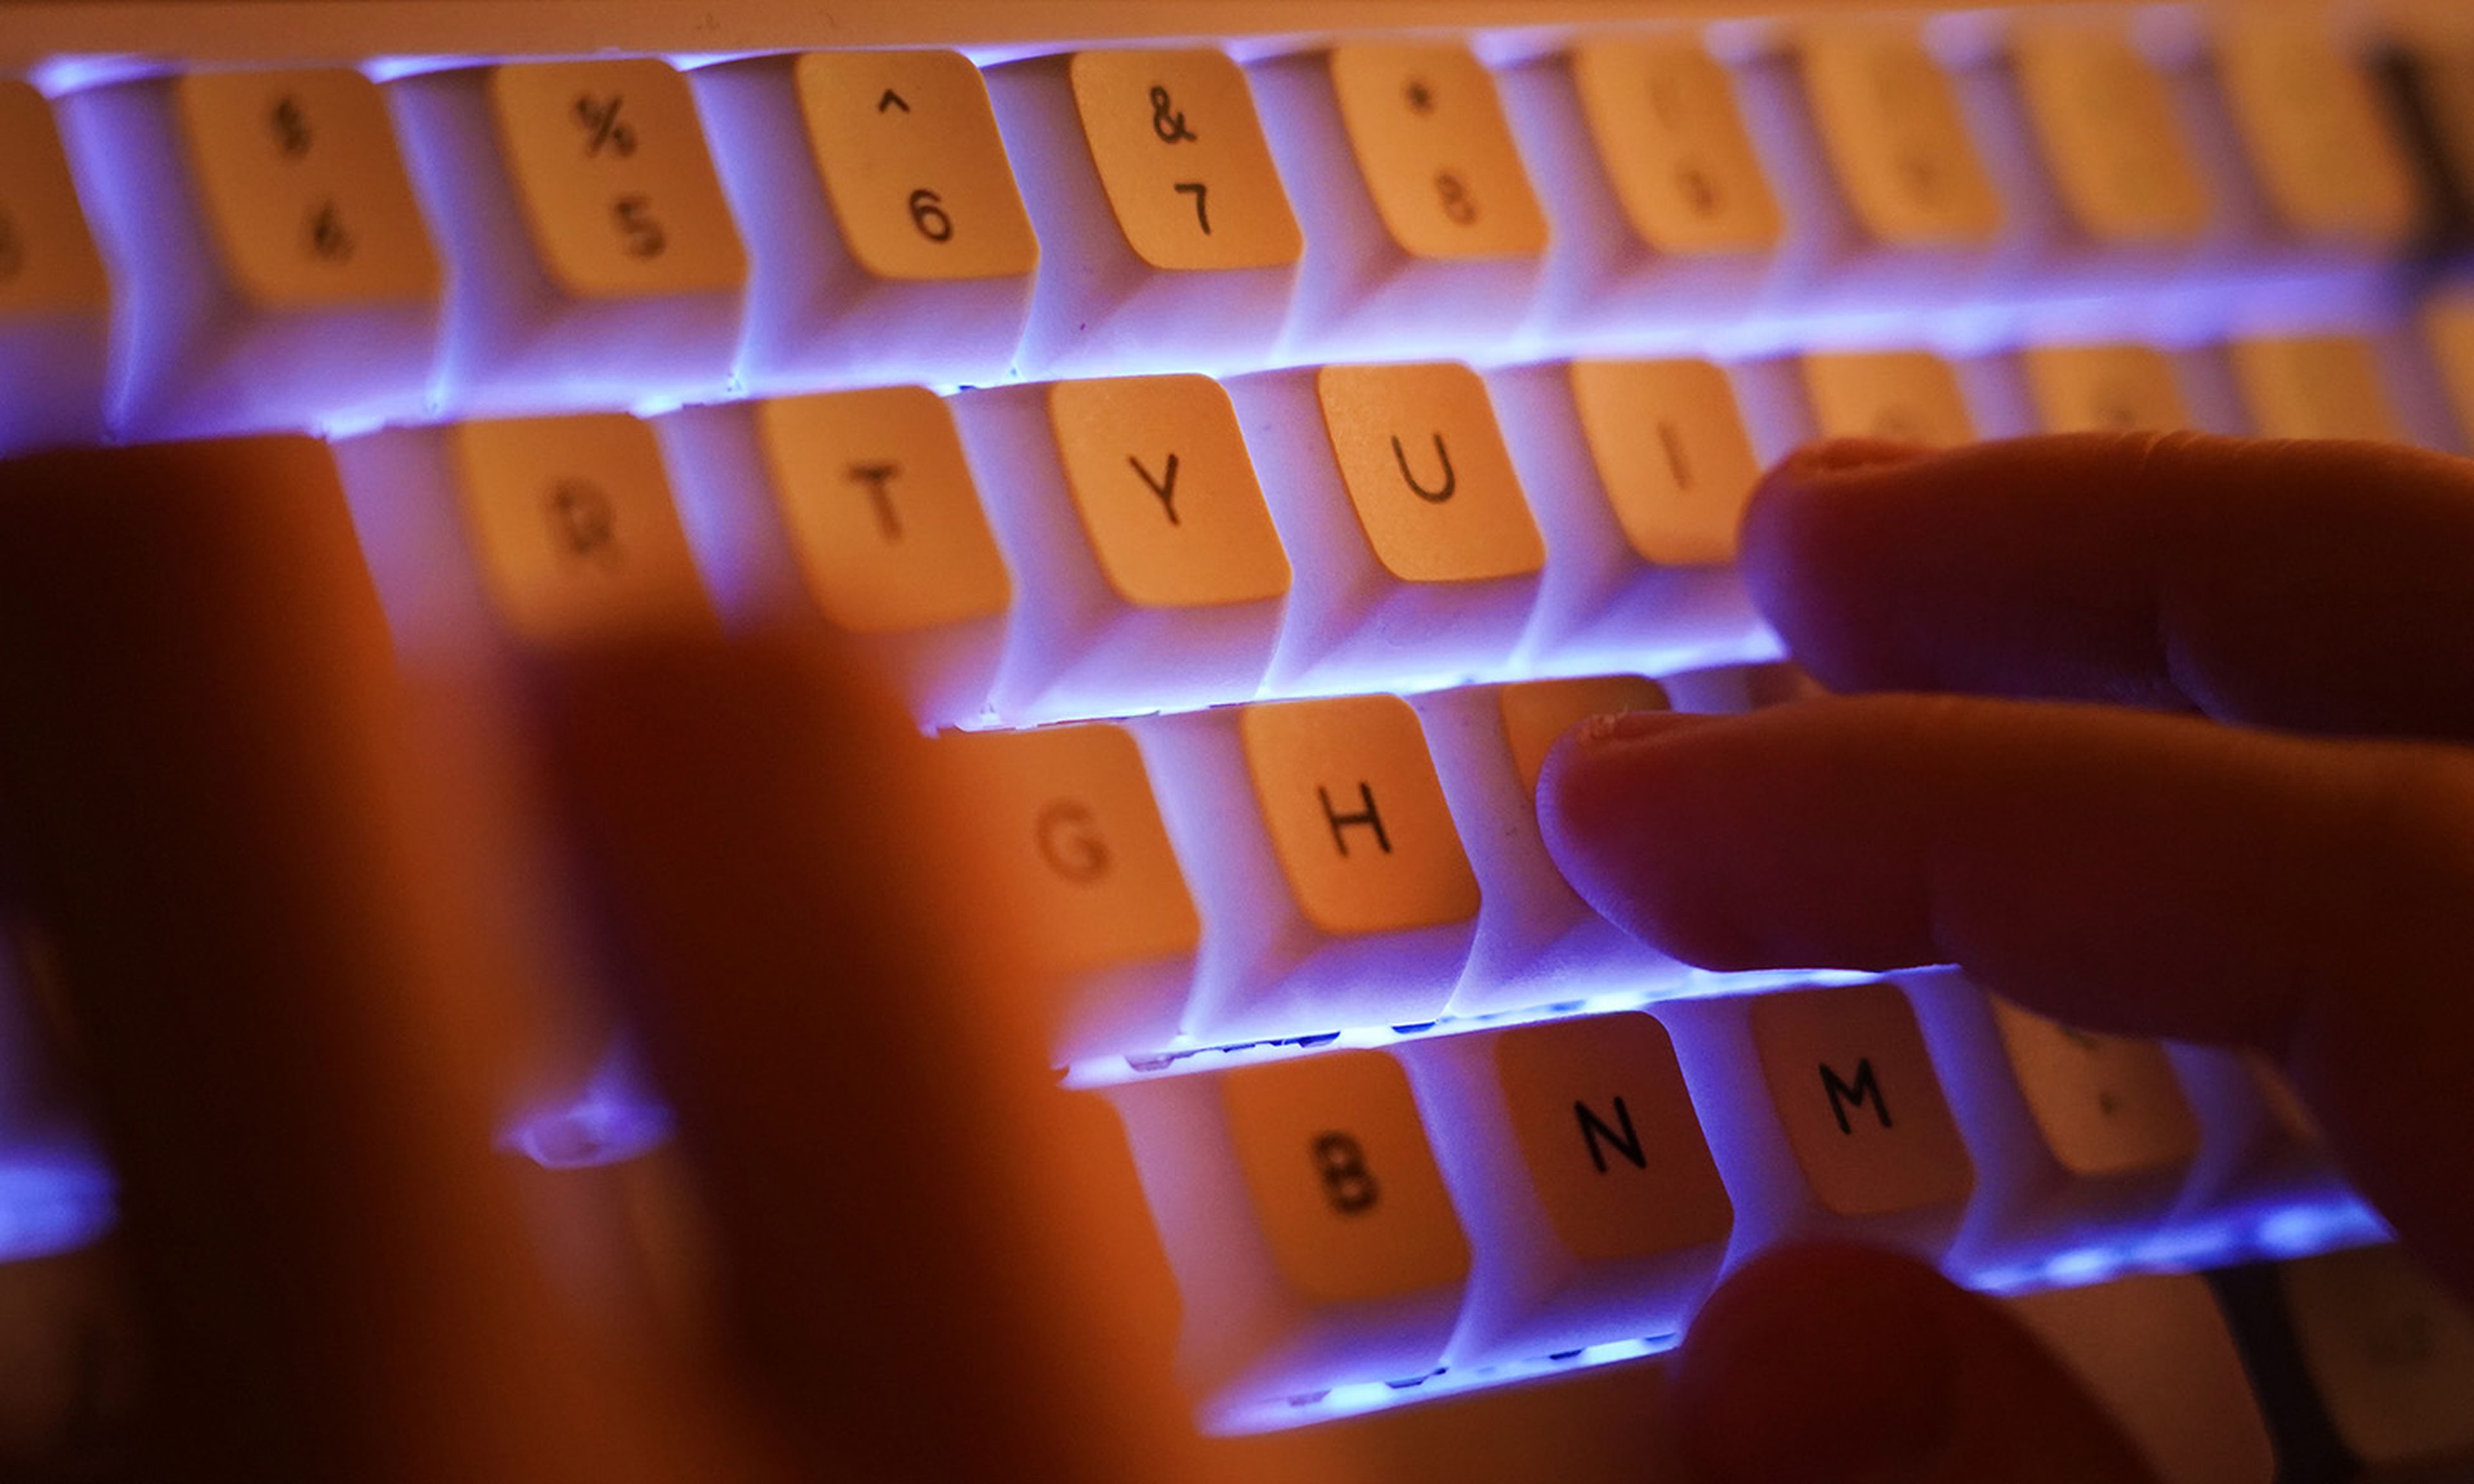 A young man types on an illuminated computer keyboard typically favored by computer coders on Jan. 25, 2021, in Berlin. (Photo by Sean Gallup/Getty Images)